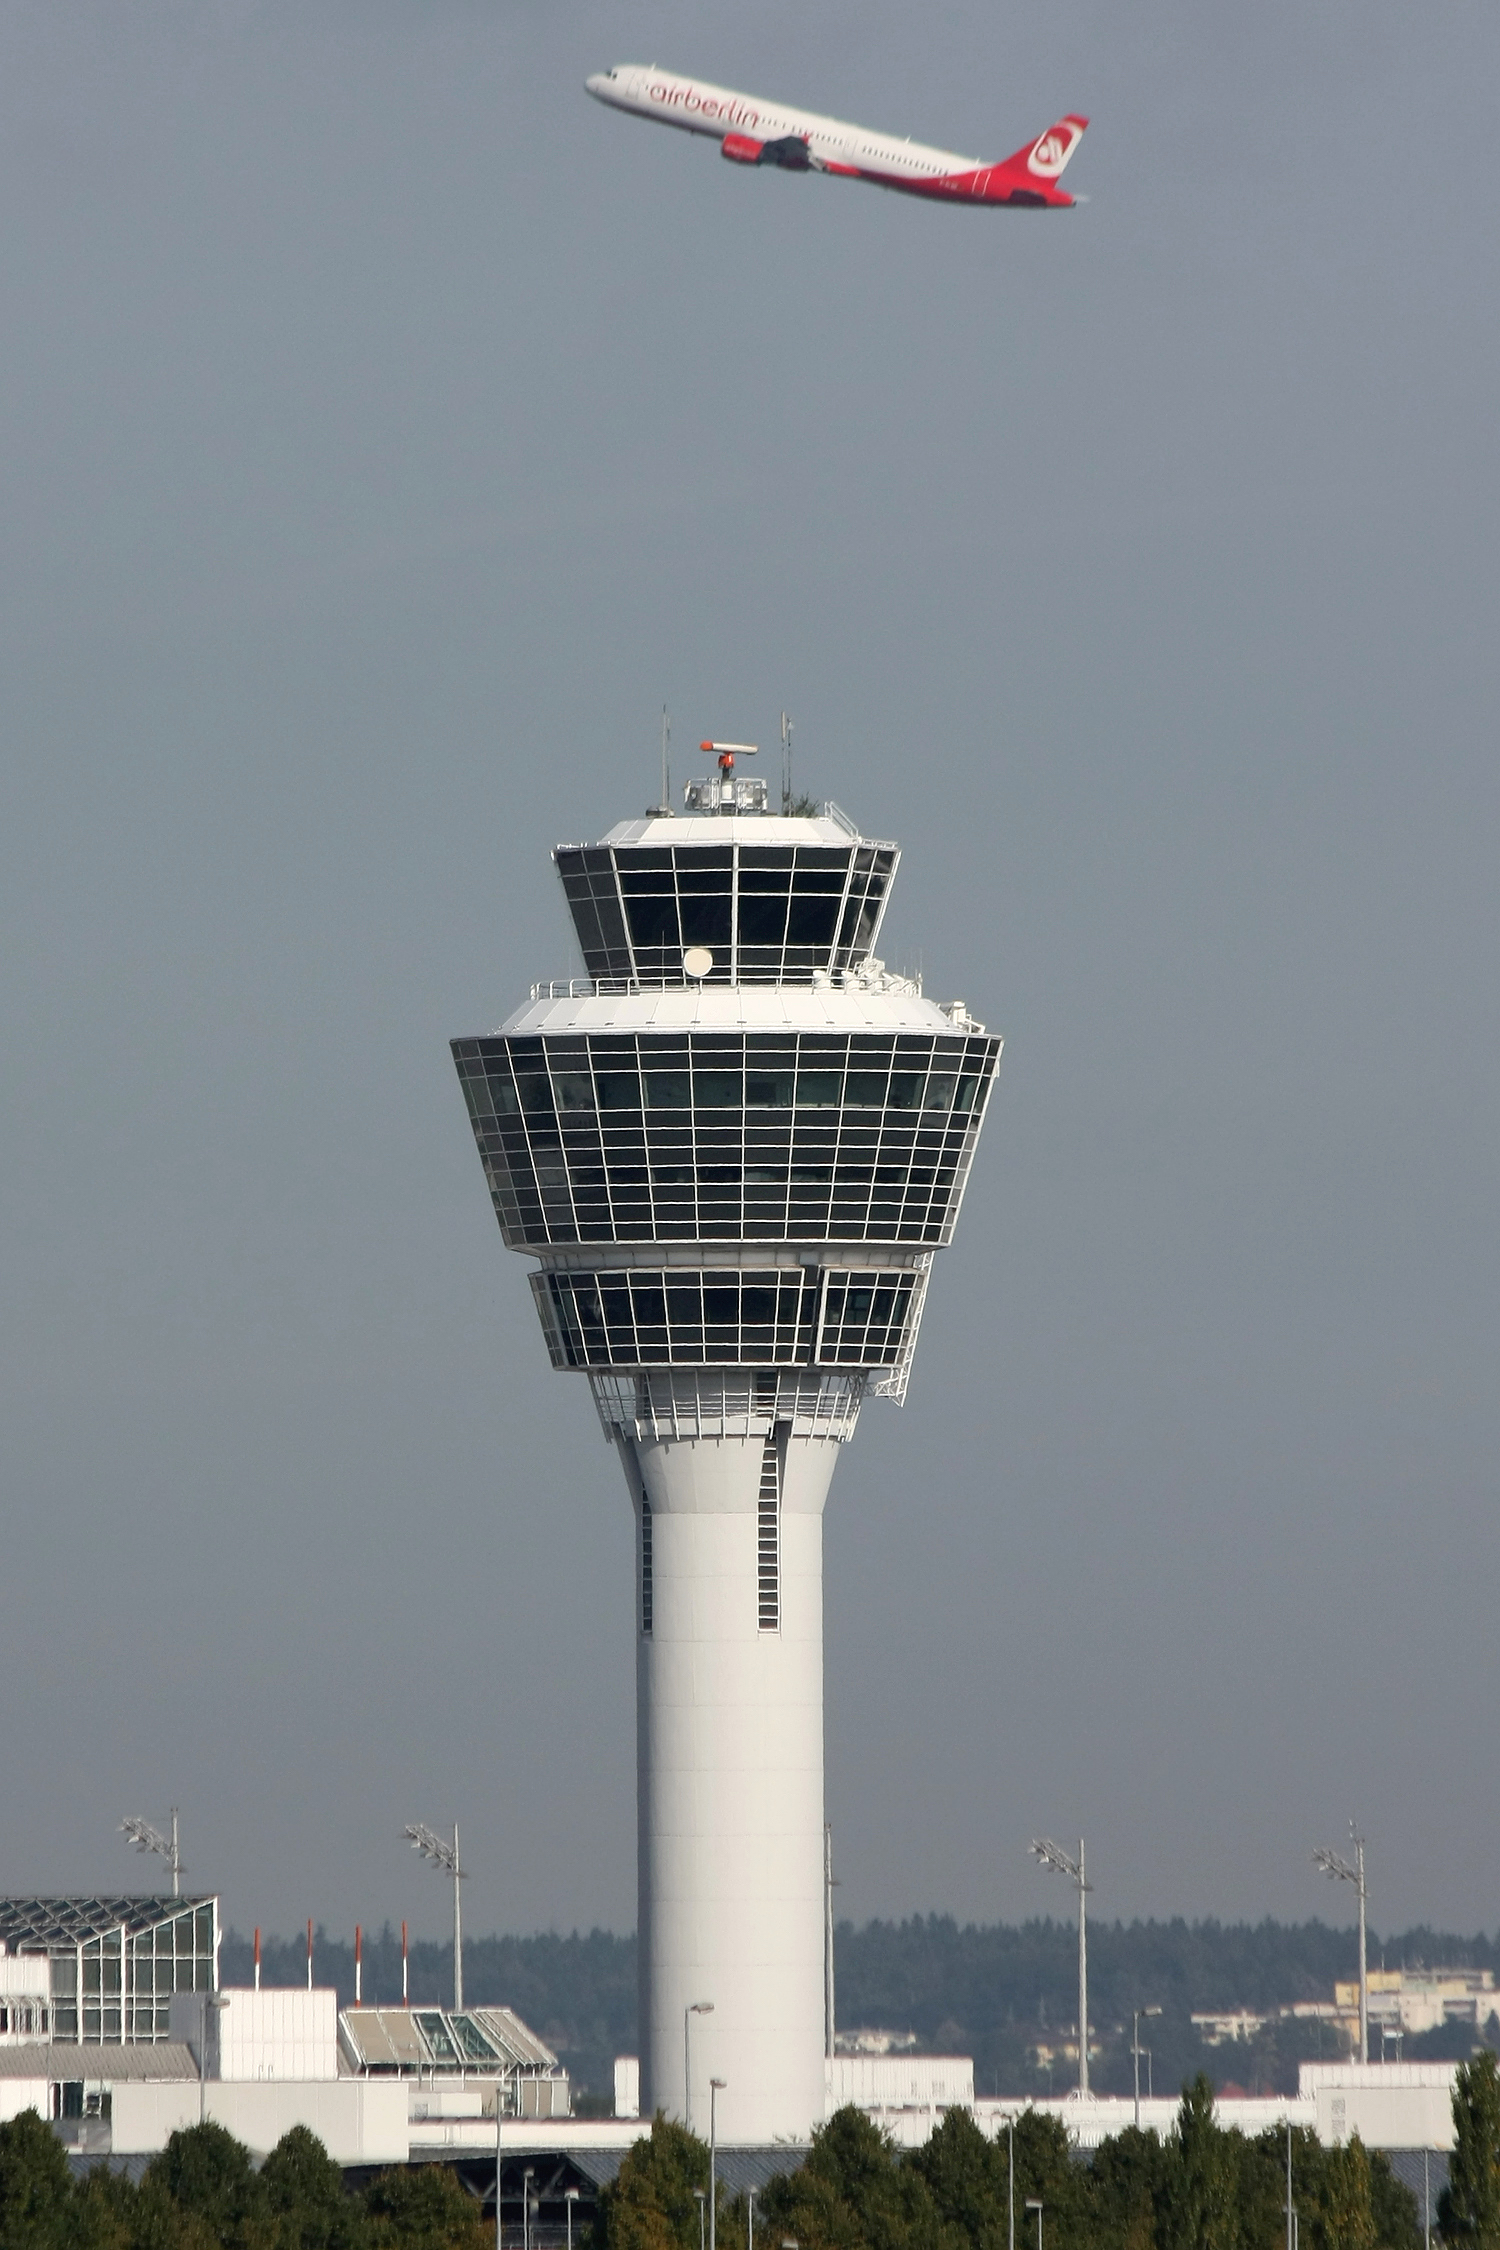 photograph of air traffic control tower and airplane taking off